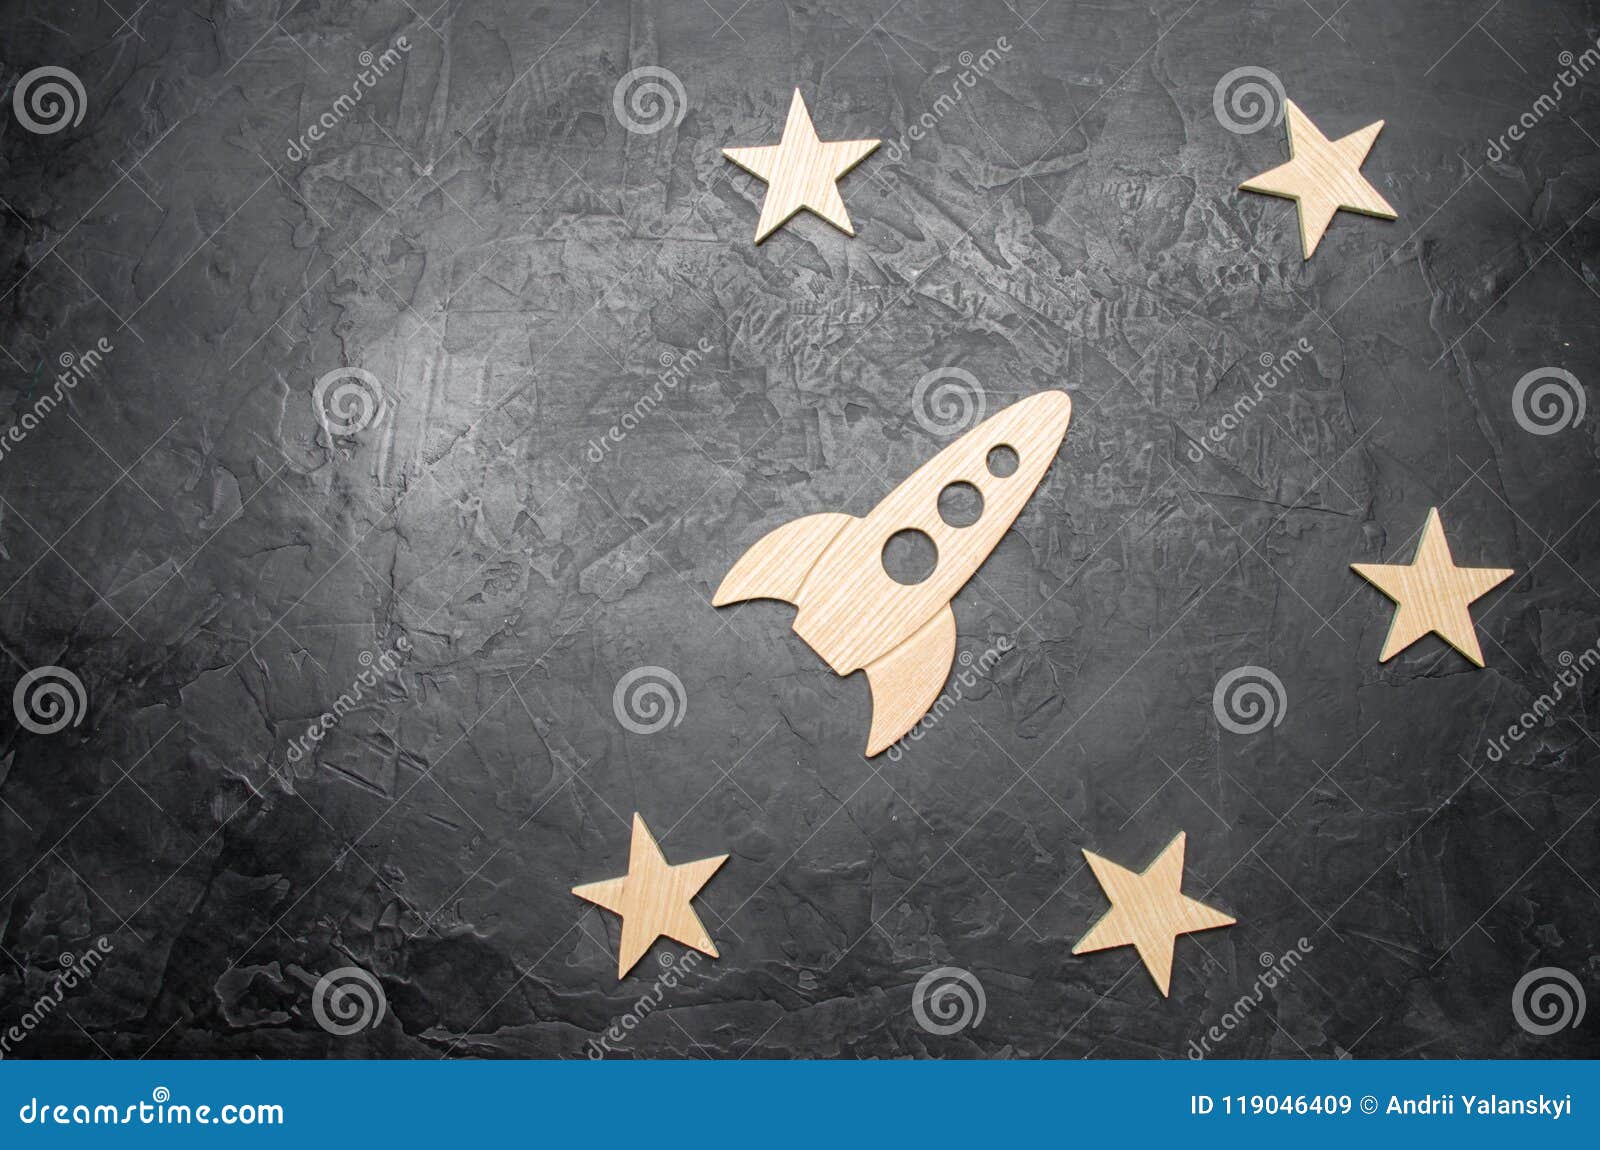 wooden space rocket and stars on a dark background. the concept of space travels, the study of planets and stars. education